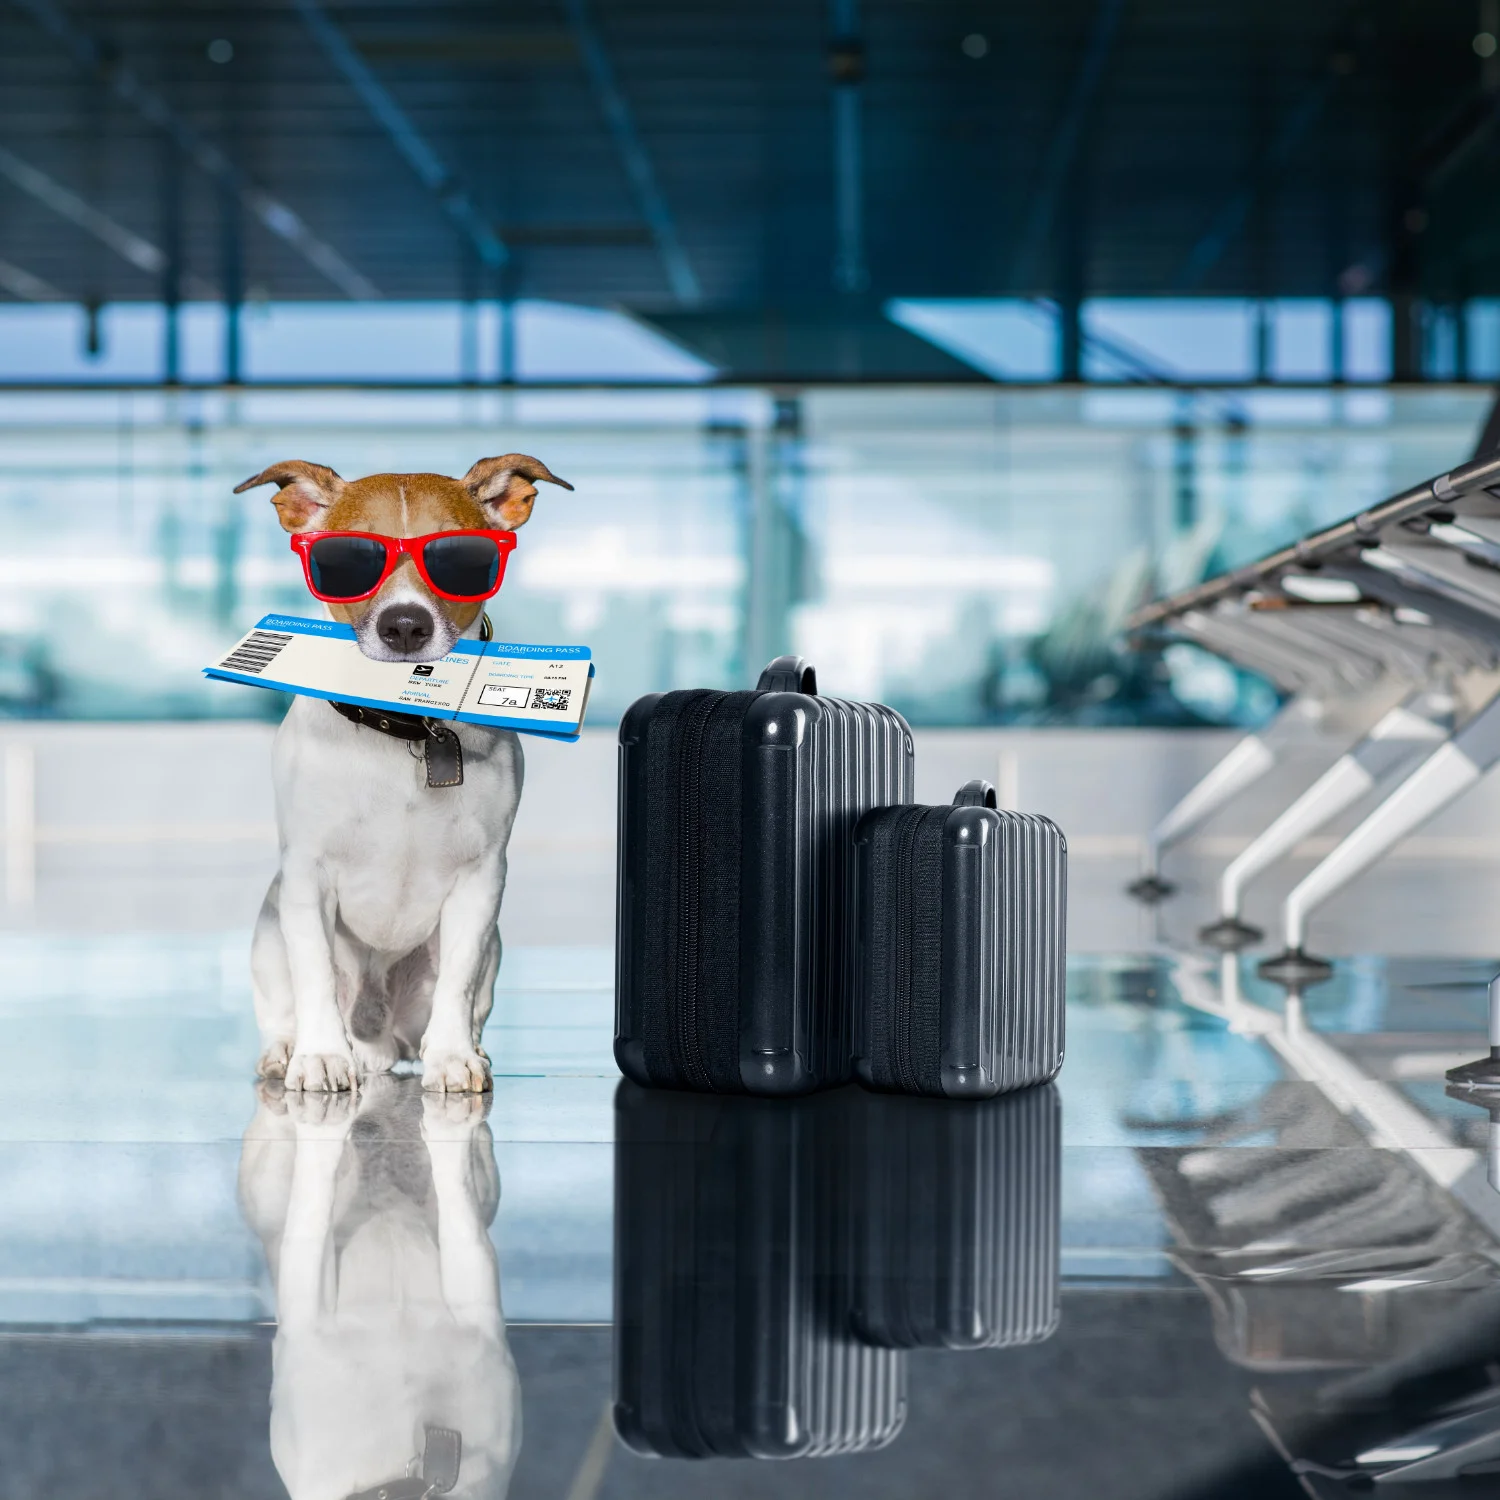 As with any destination, if you’re planning on flying to Bulgaria, ask your airline about pet travel policies and restrictions.  